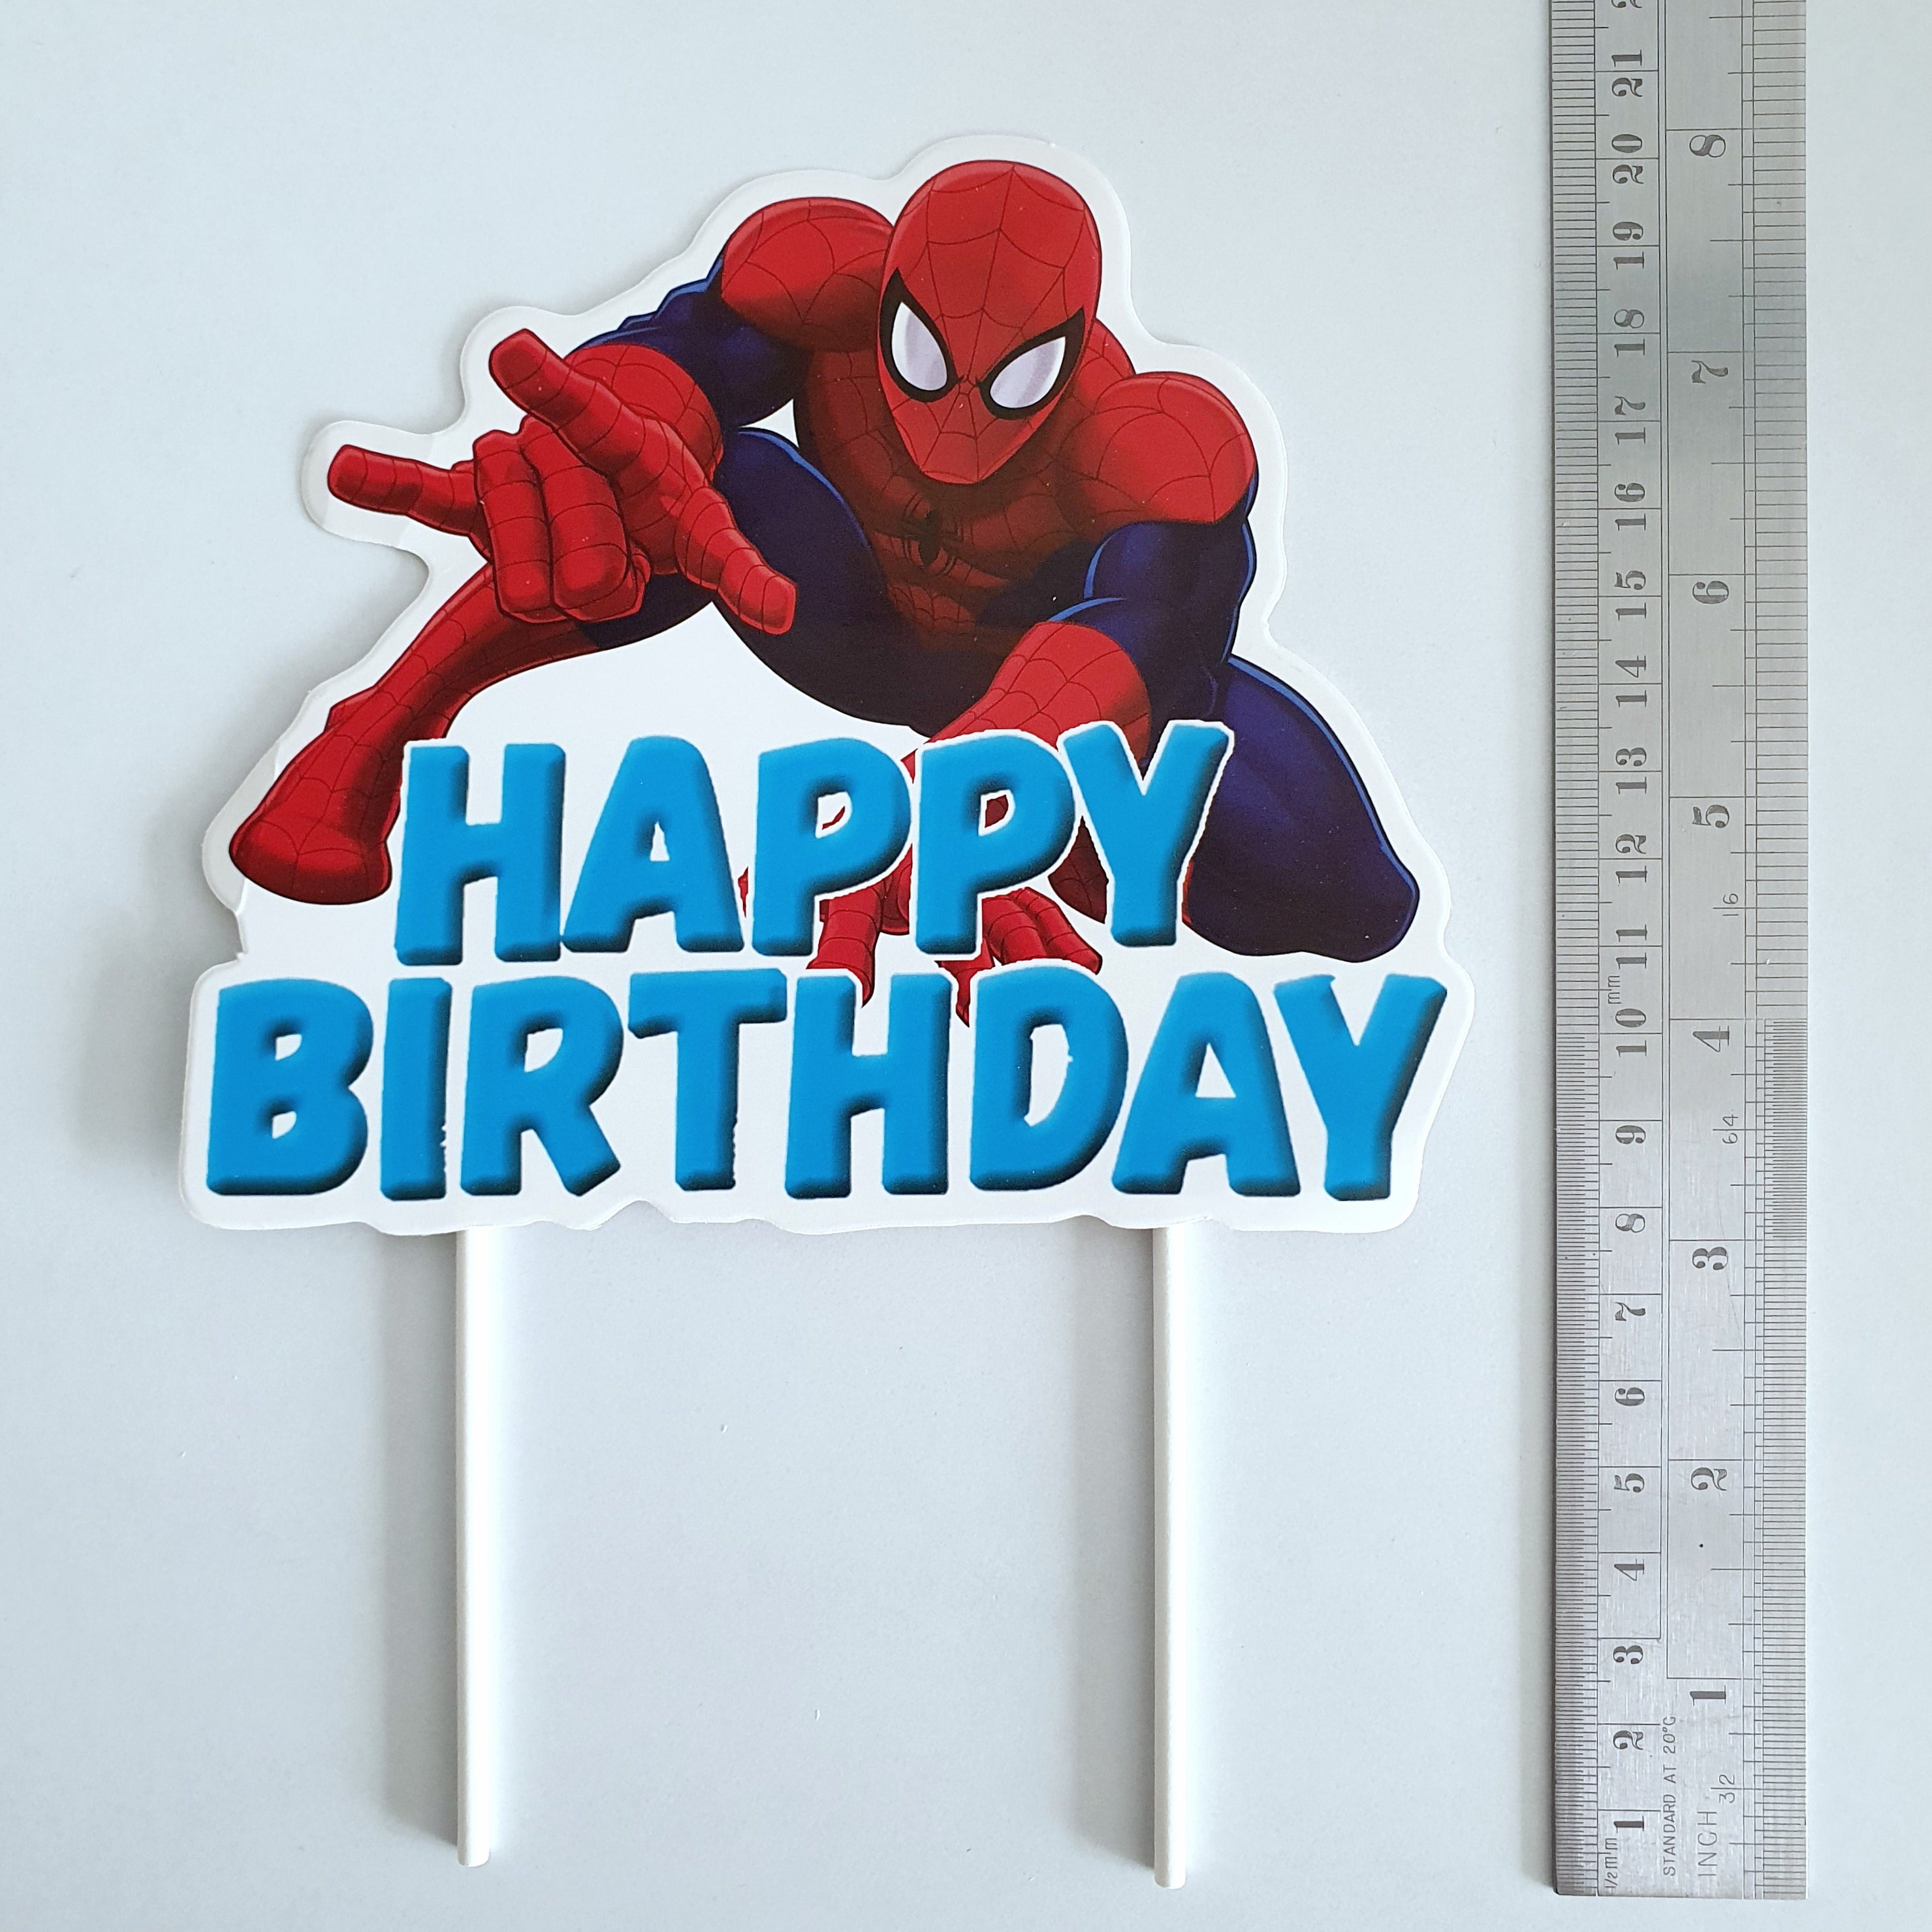 Spider man cake |Spiderman Cake Perfect and Easy Decorating - YouTube